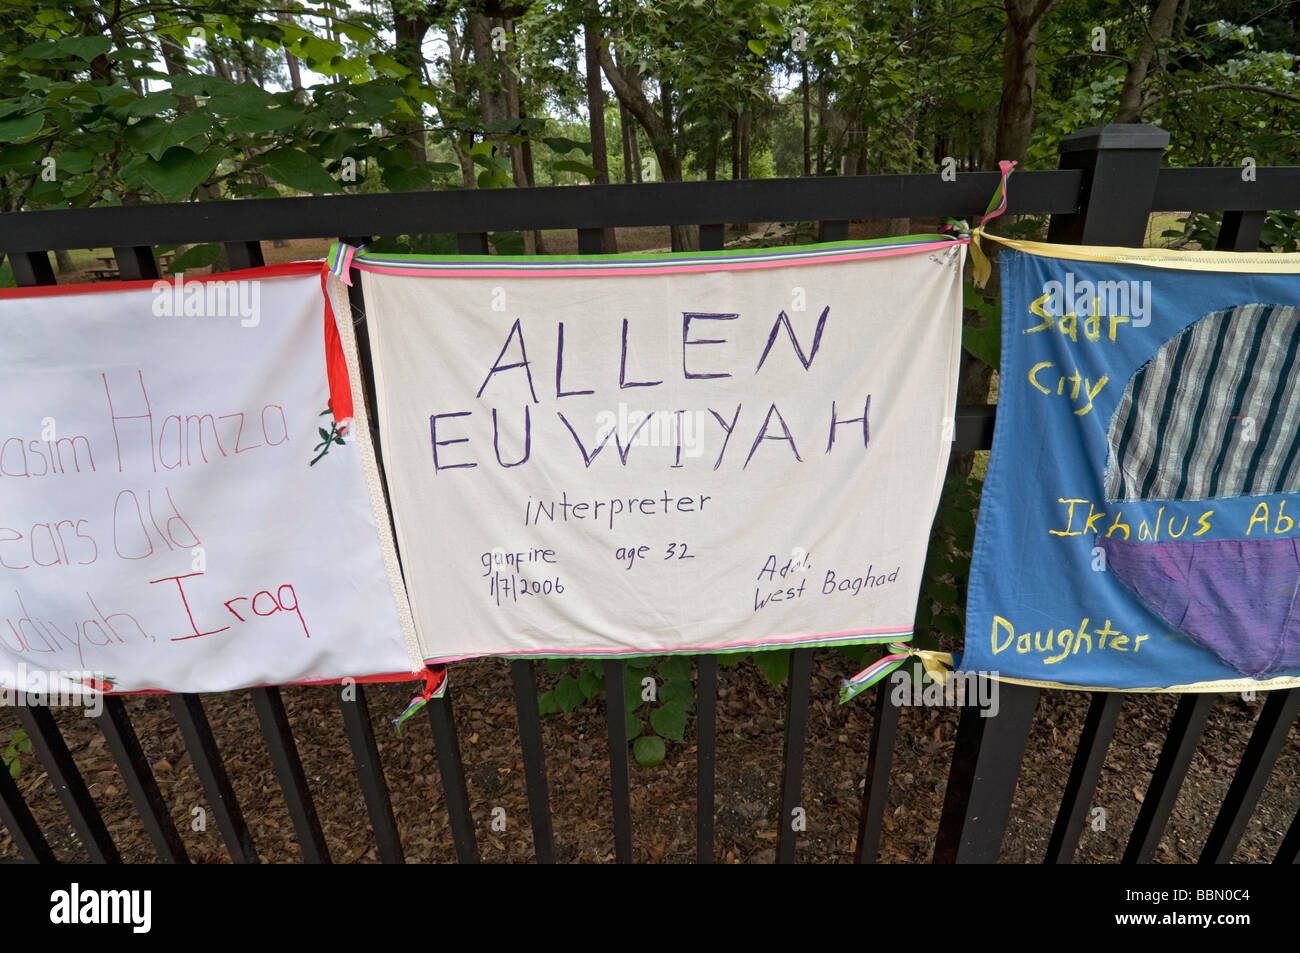 U.S. Memorial Day observance banners for fallen U.S. servicemen and civilians in Iraq and Afghanistan, Gainesville,Florida. Stock Photo